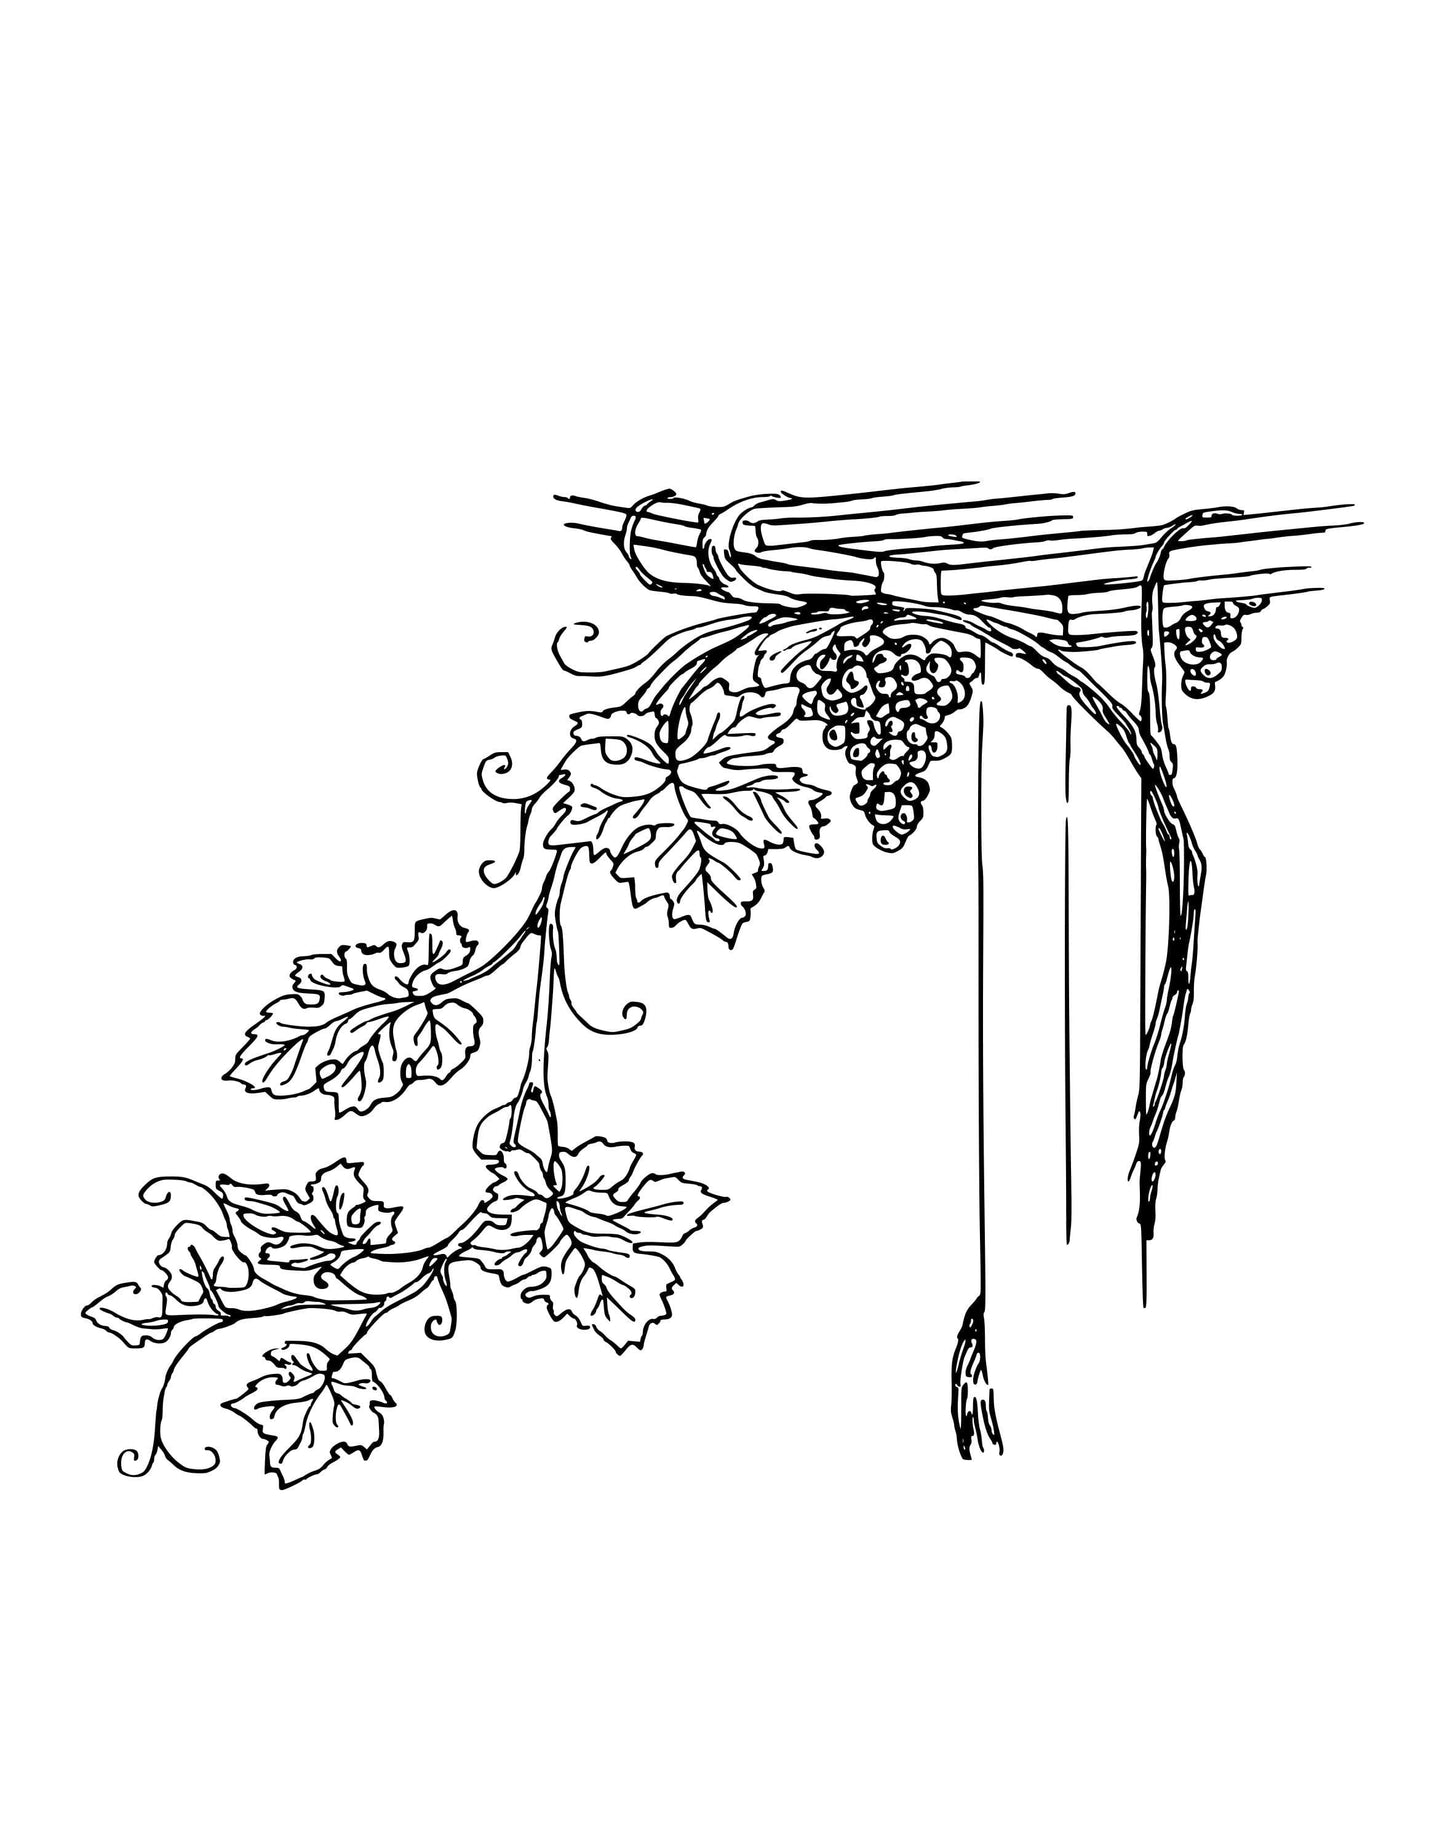 Grape Vine Floral Vinyl Wall Decal Sticker for the Kitchen. #276